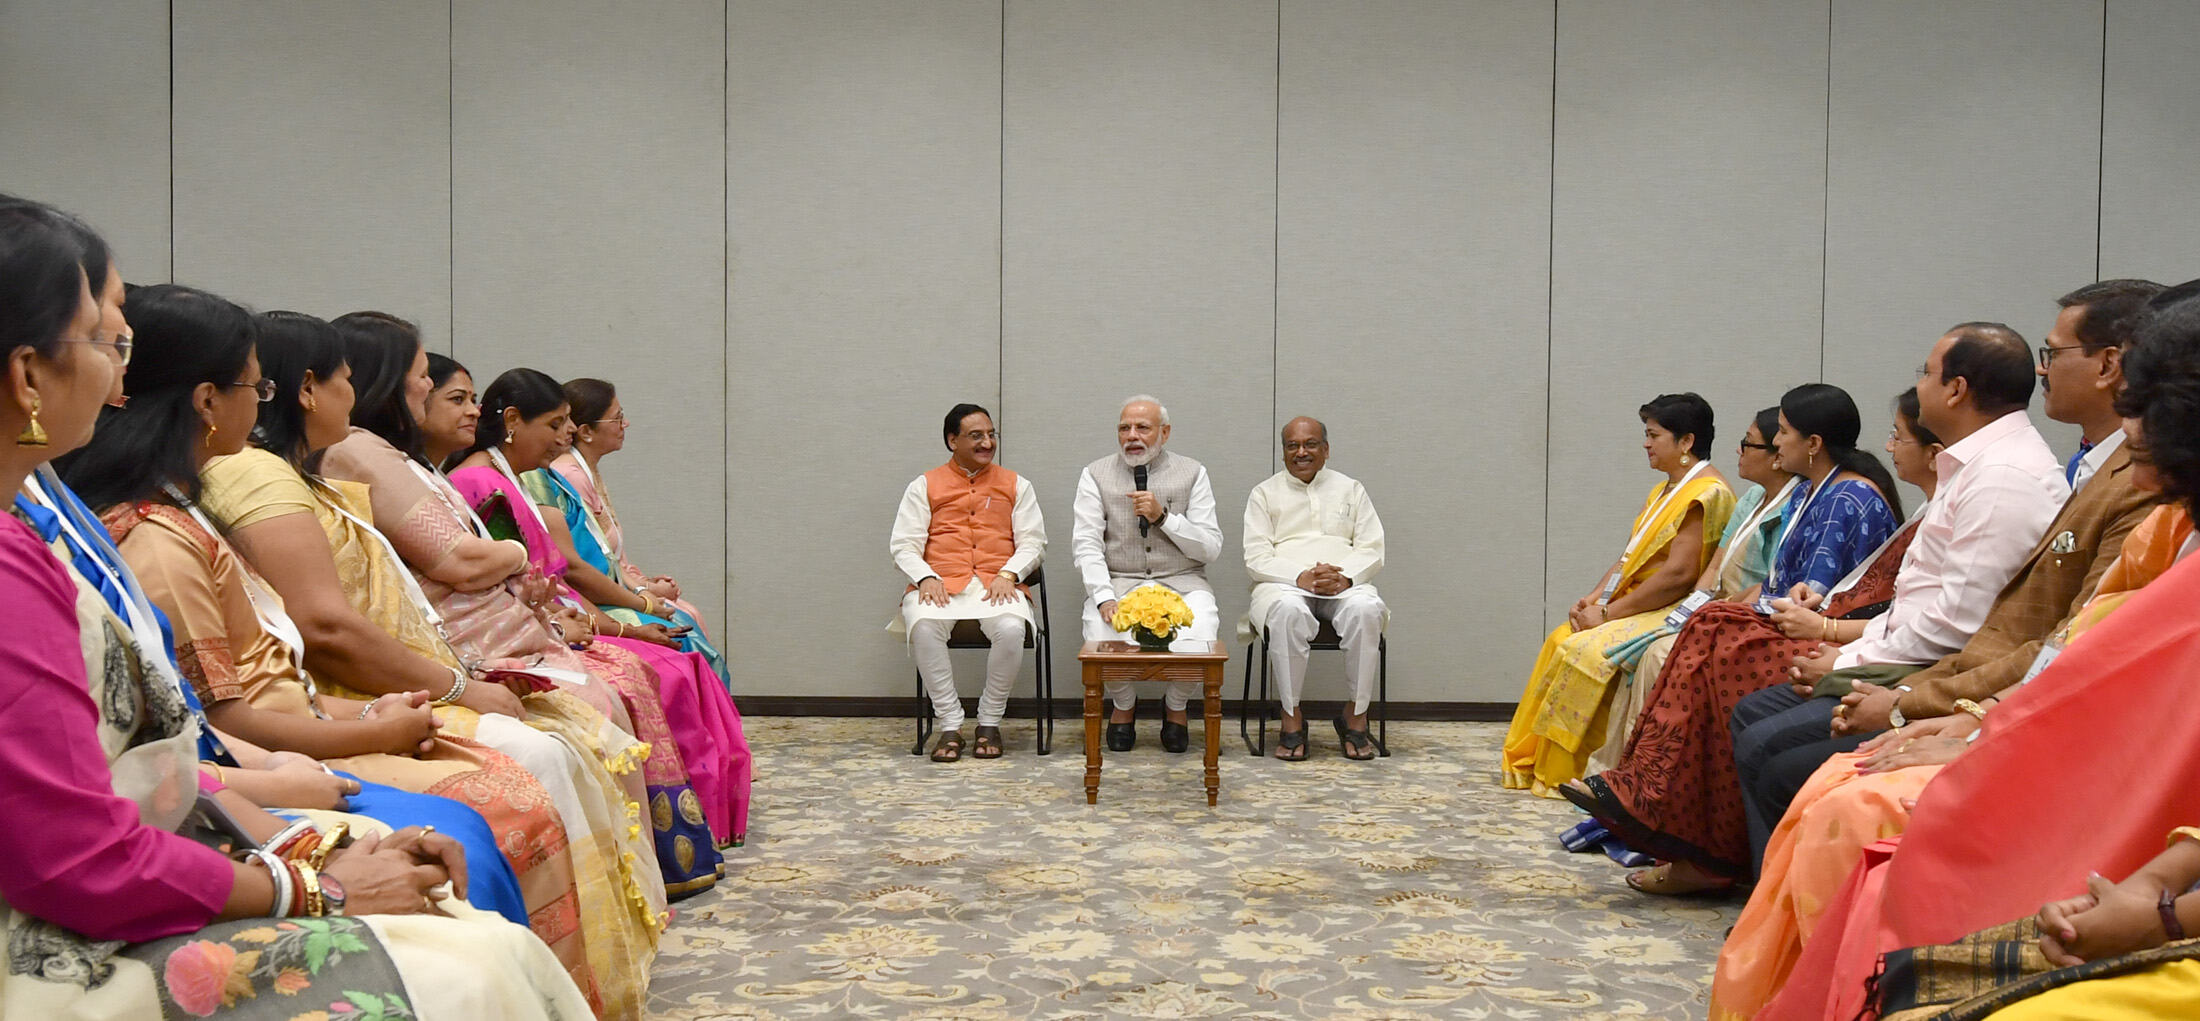 The Prime Minister,  Narendra Modi interacting with the recipients of the National Teacher Awards’ 2018, in New Delhi on September 03, 2019. The Union Minister for Human Resource Development, Dr. Ramesh Pokhriyal ‘Nishank’ and the Minister of State for Human Resource Development, Communications and Information Technology,  Dhotre Sanjay Shamrao are also seen.